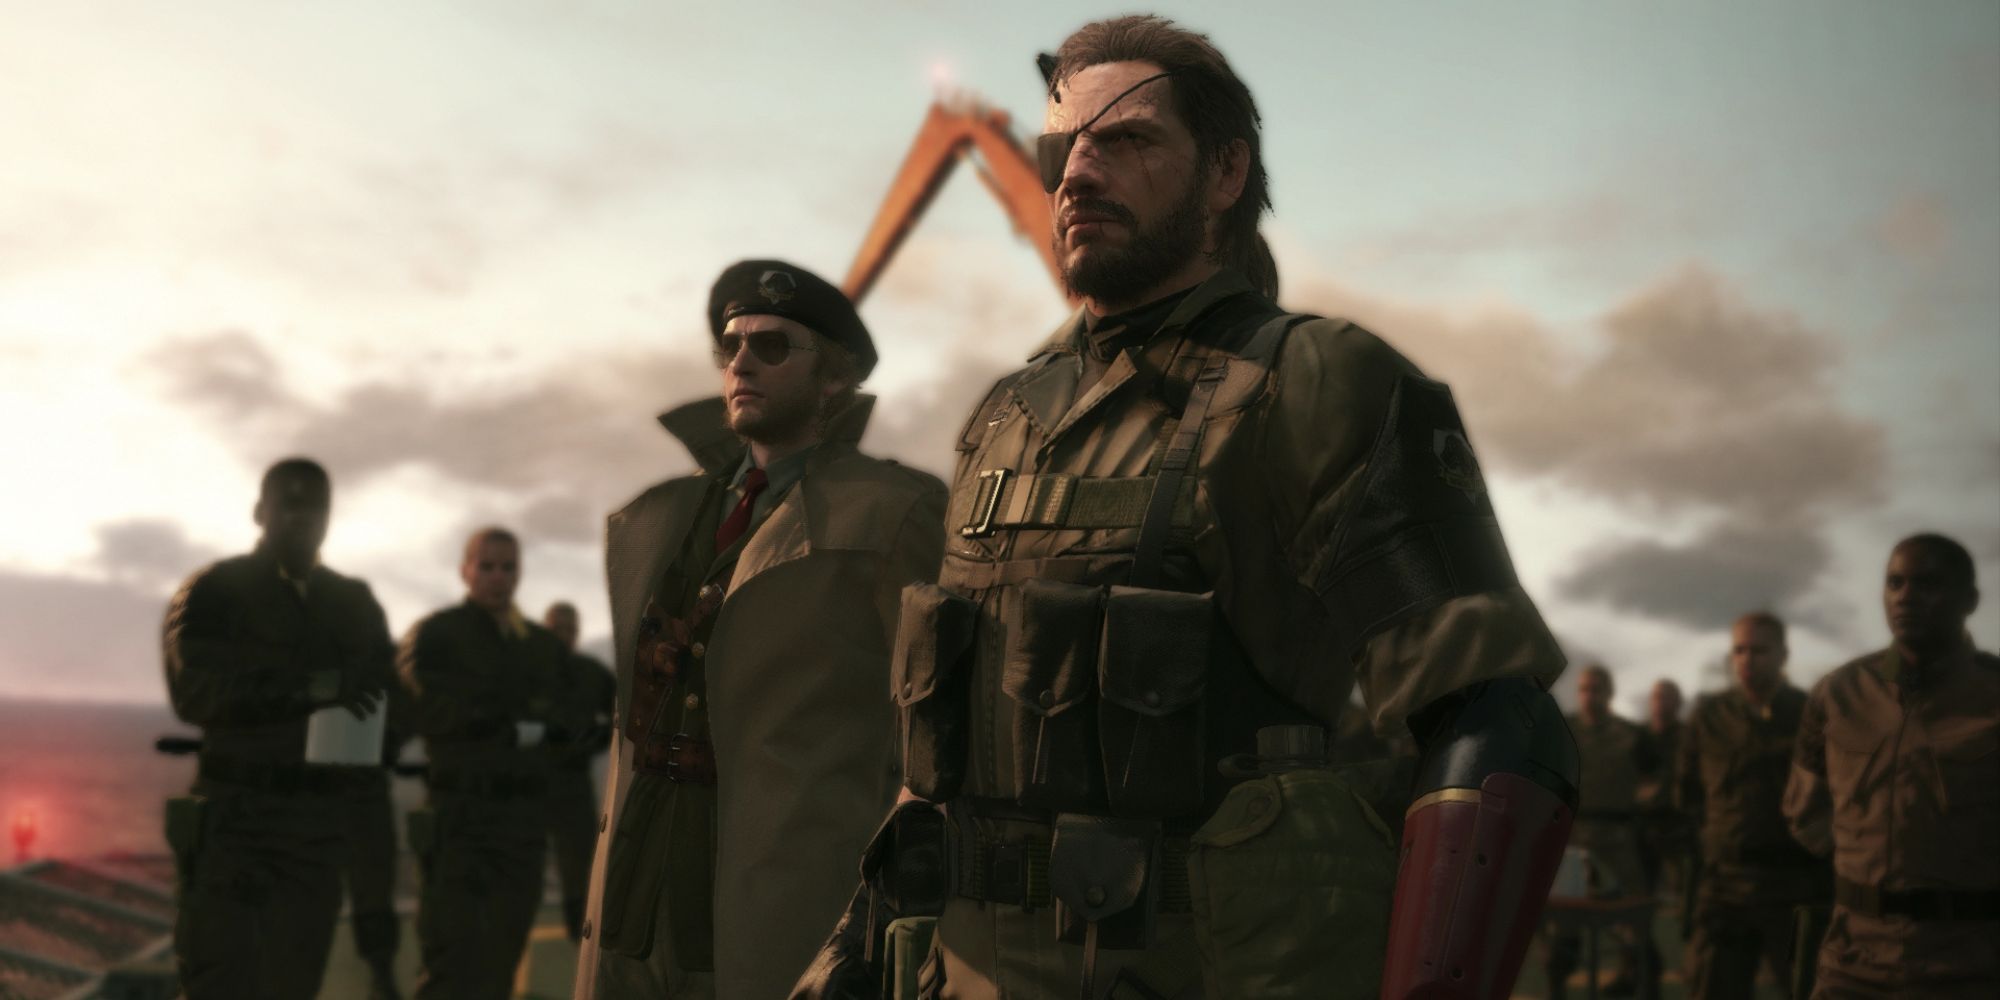 A group of soldiers standing together in Metal Gear Solid 5: The Phantom Pain